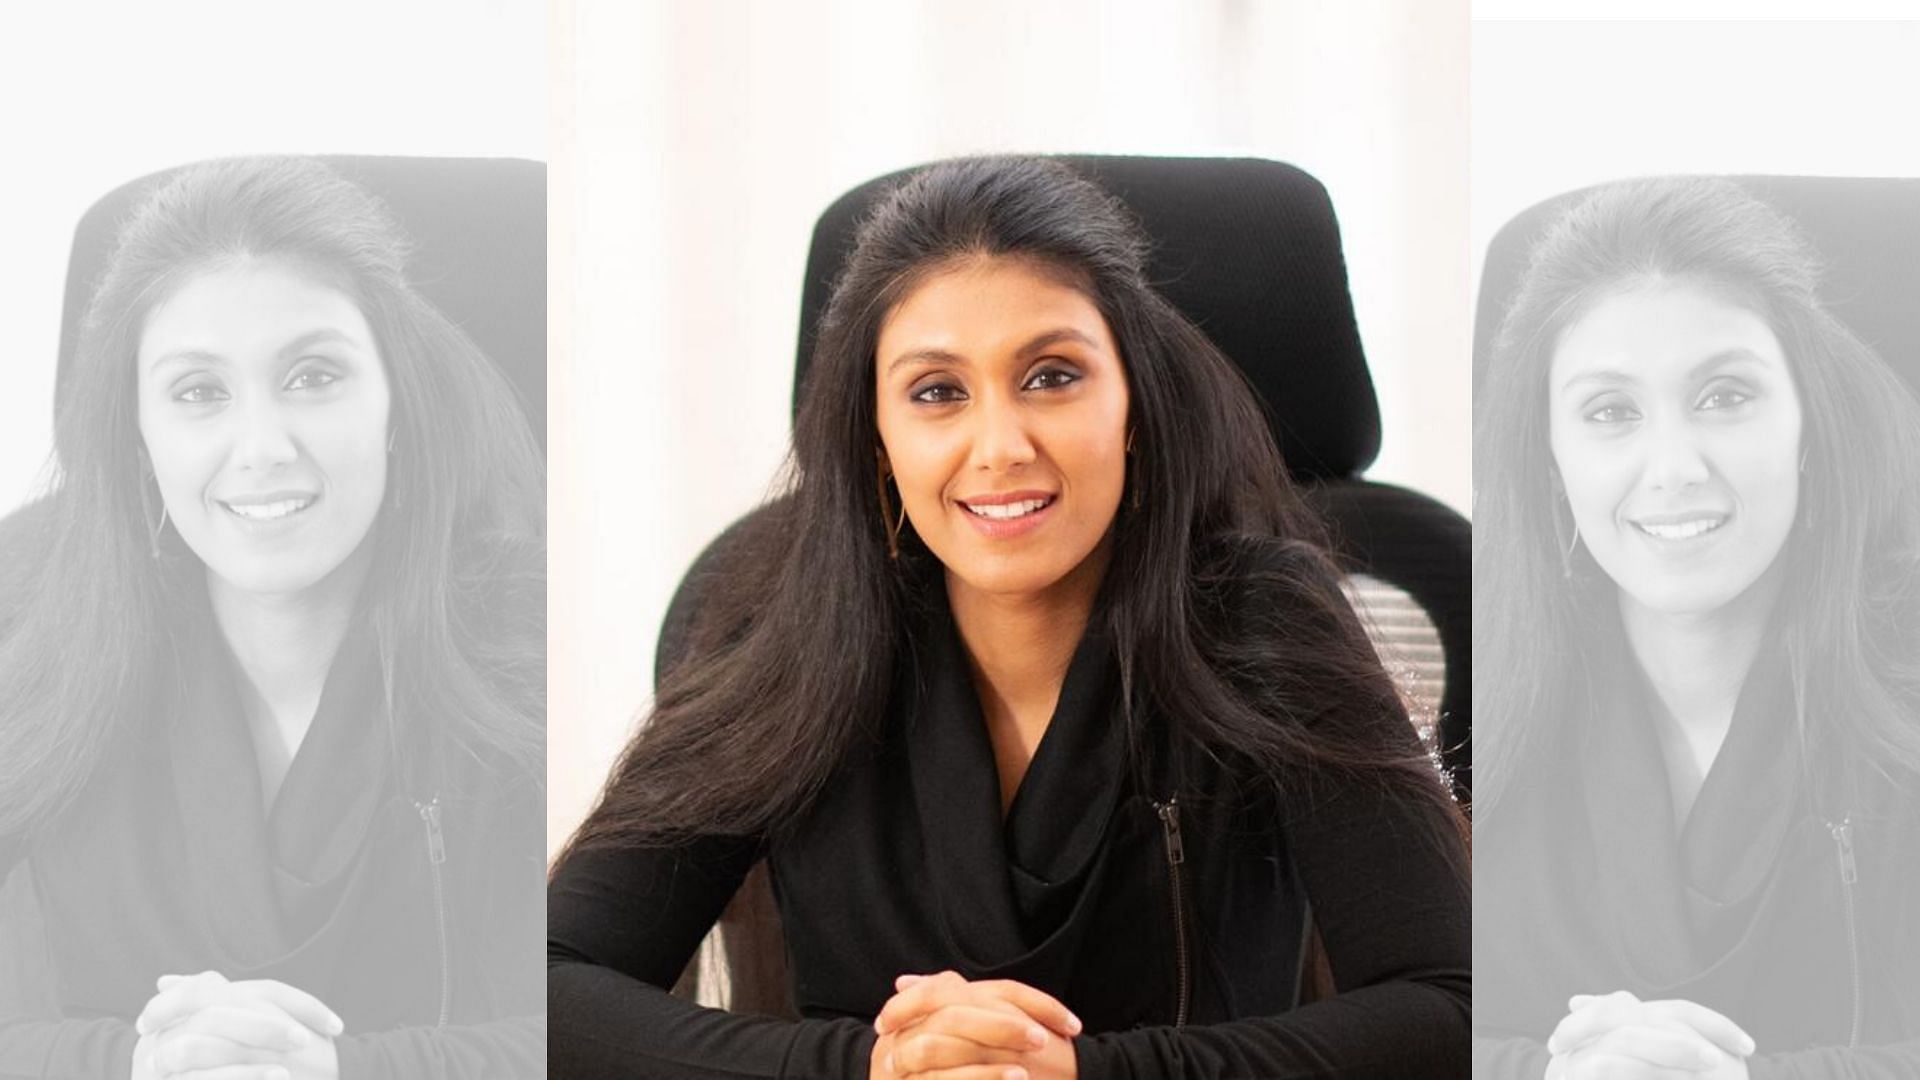 HCL Technologies on Friday, 17 July, announced that Roshni Nadar Malhotra, daughter of the incumbent chairperson Shiv Nadar, has been appointed the new chairperson of the company’s board of directors with immediate effect.